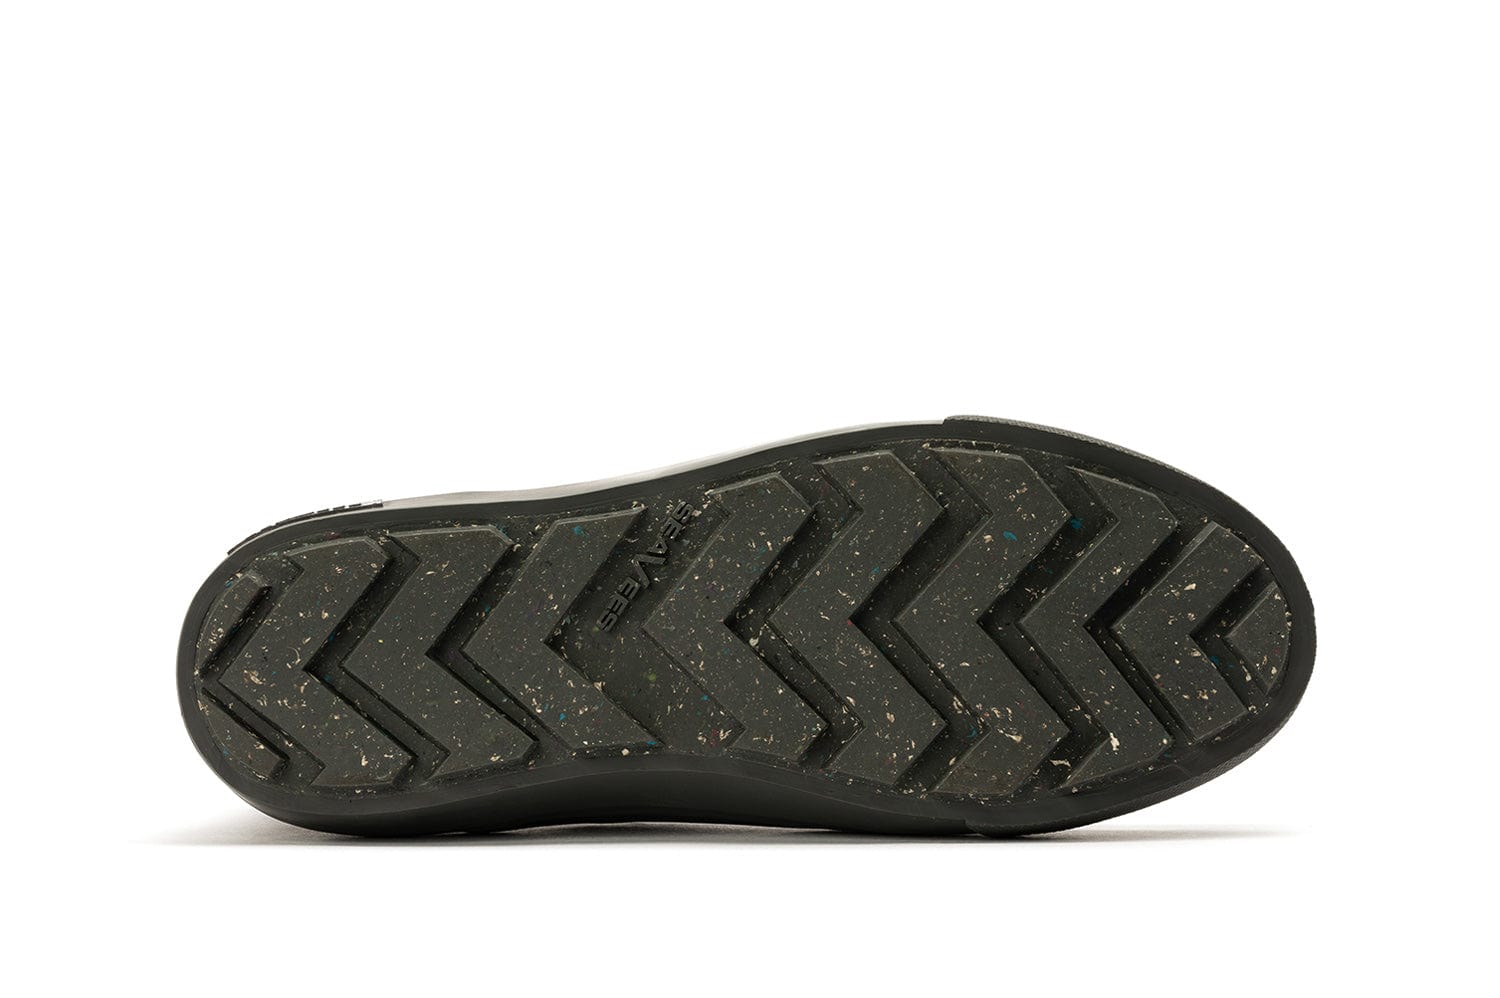 Treaded sole view of Ballard Boot in Charcoal, focusing on the unique pattern for traction.